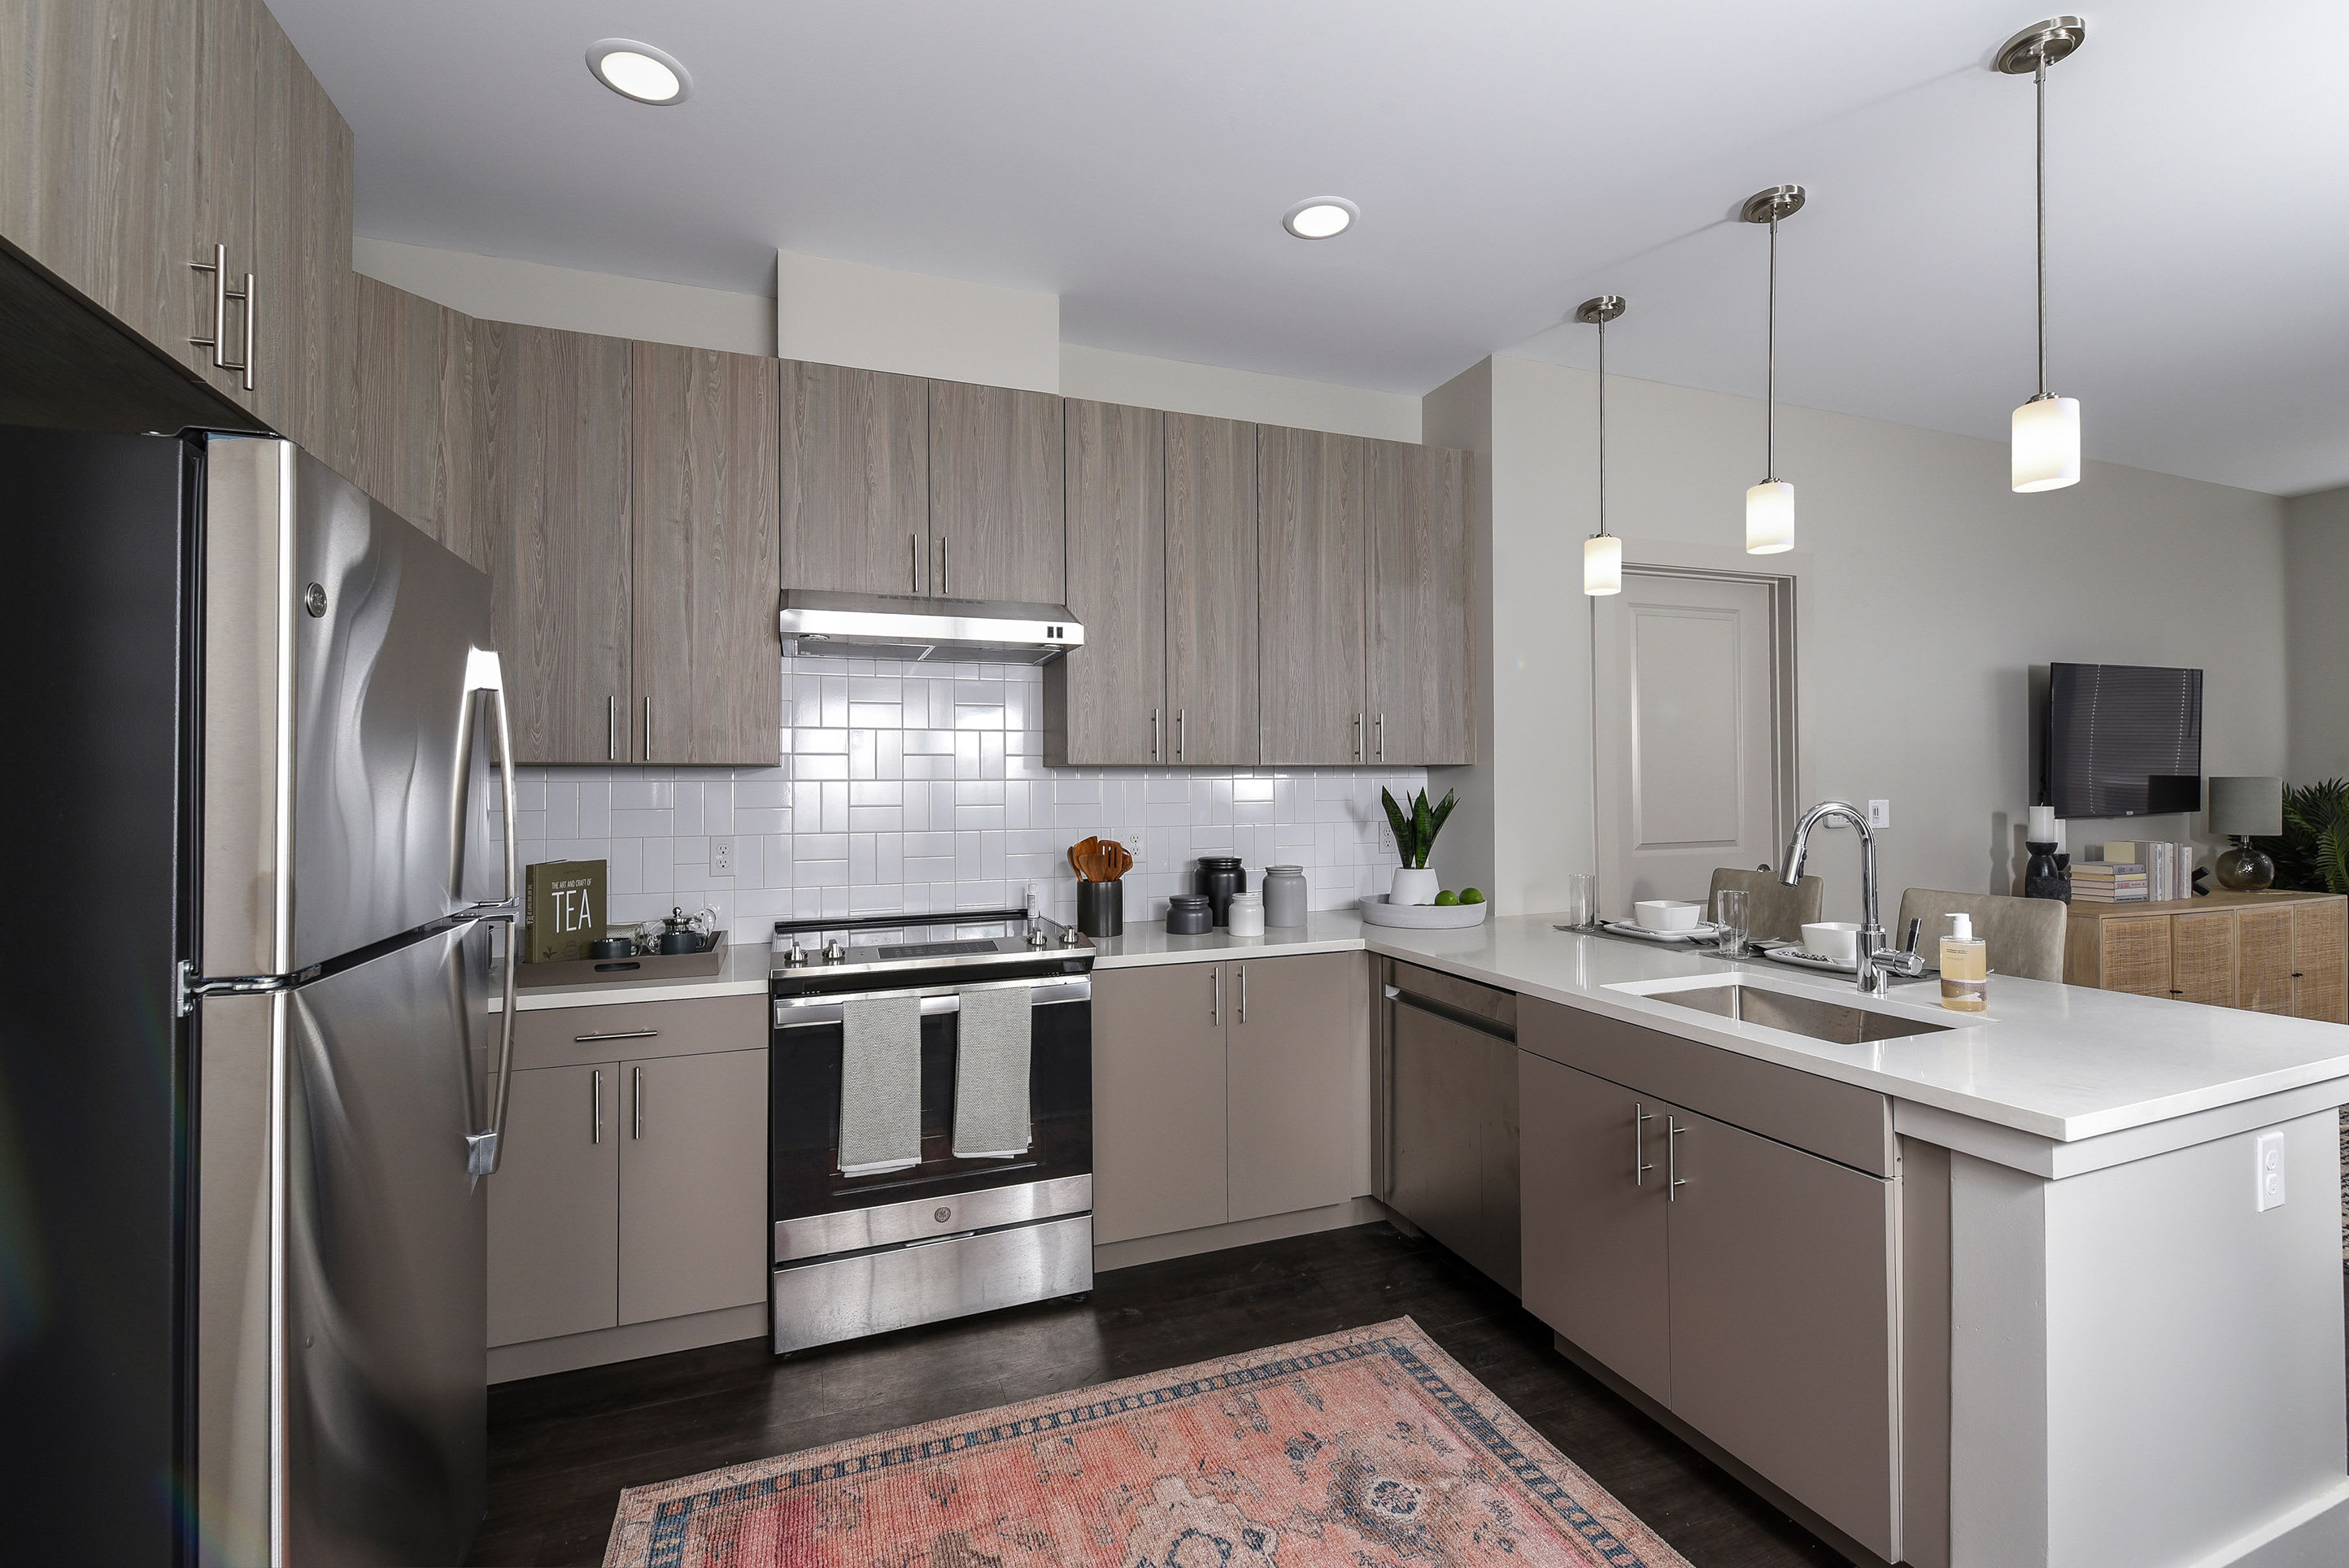 Model kitchen with wood cabinets at SilverLake, Belleville, New Jersey